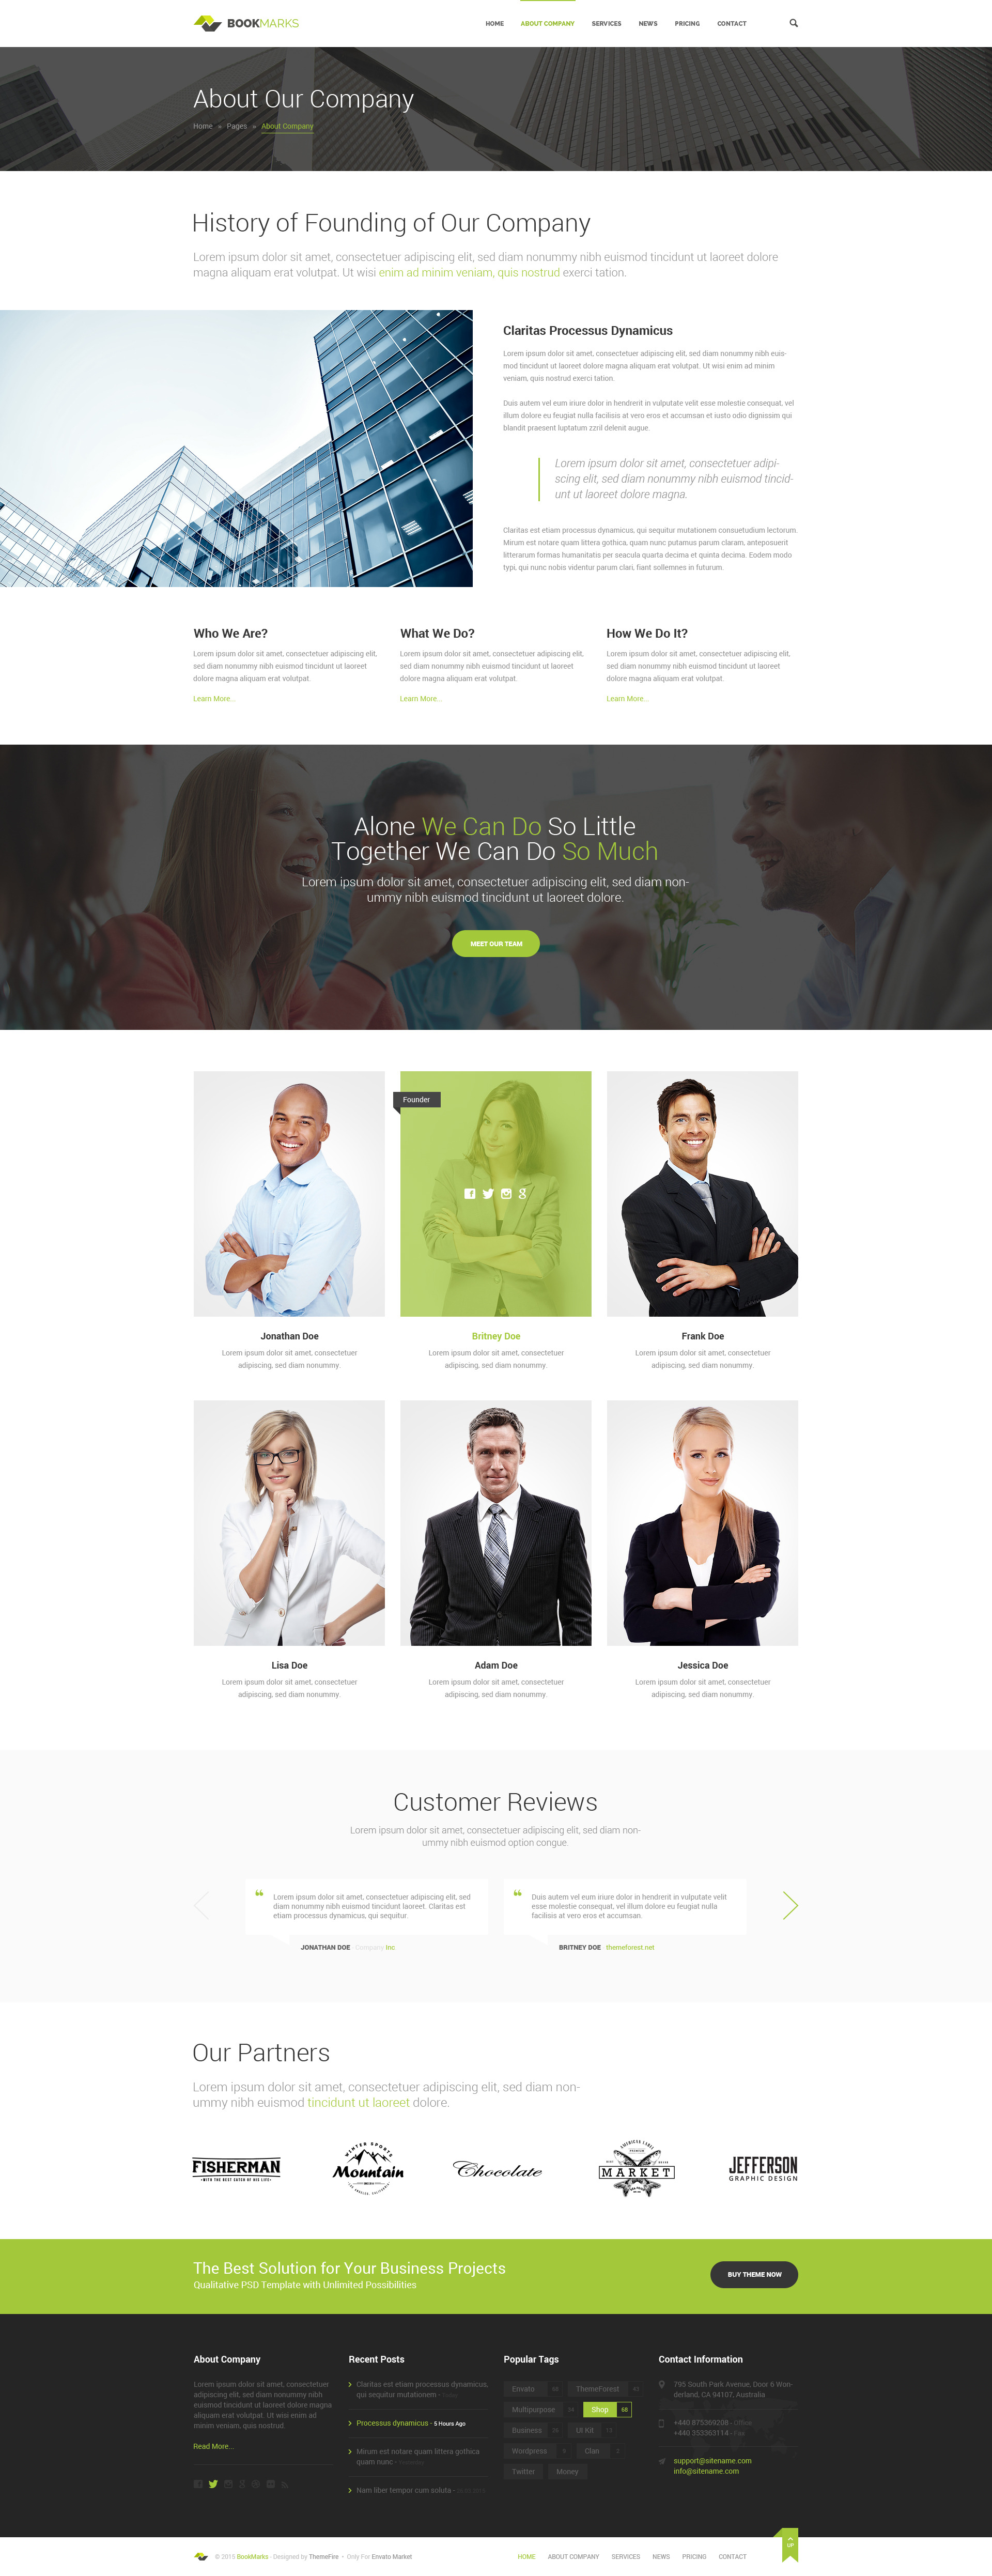 BookMarks - Corporate & OnePage PSD Template